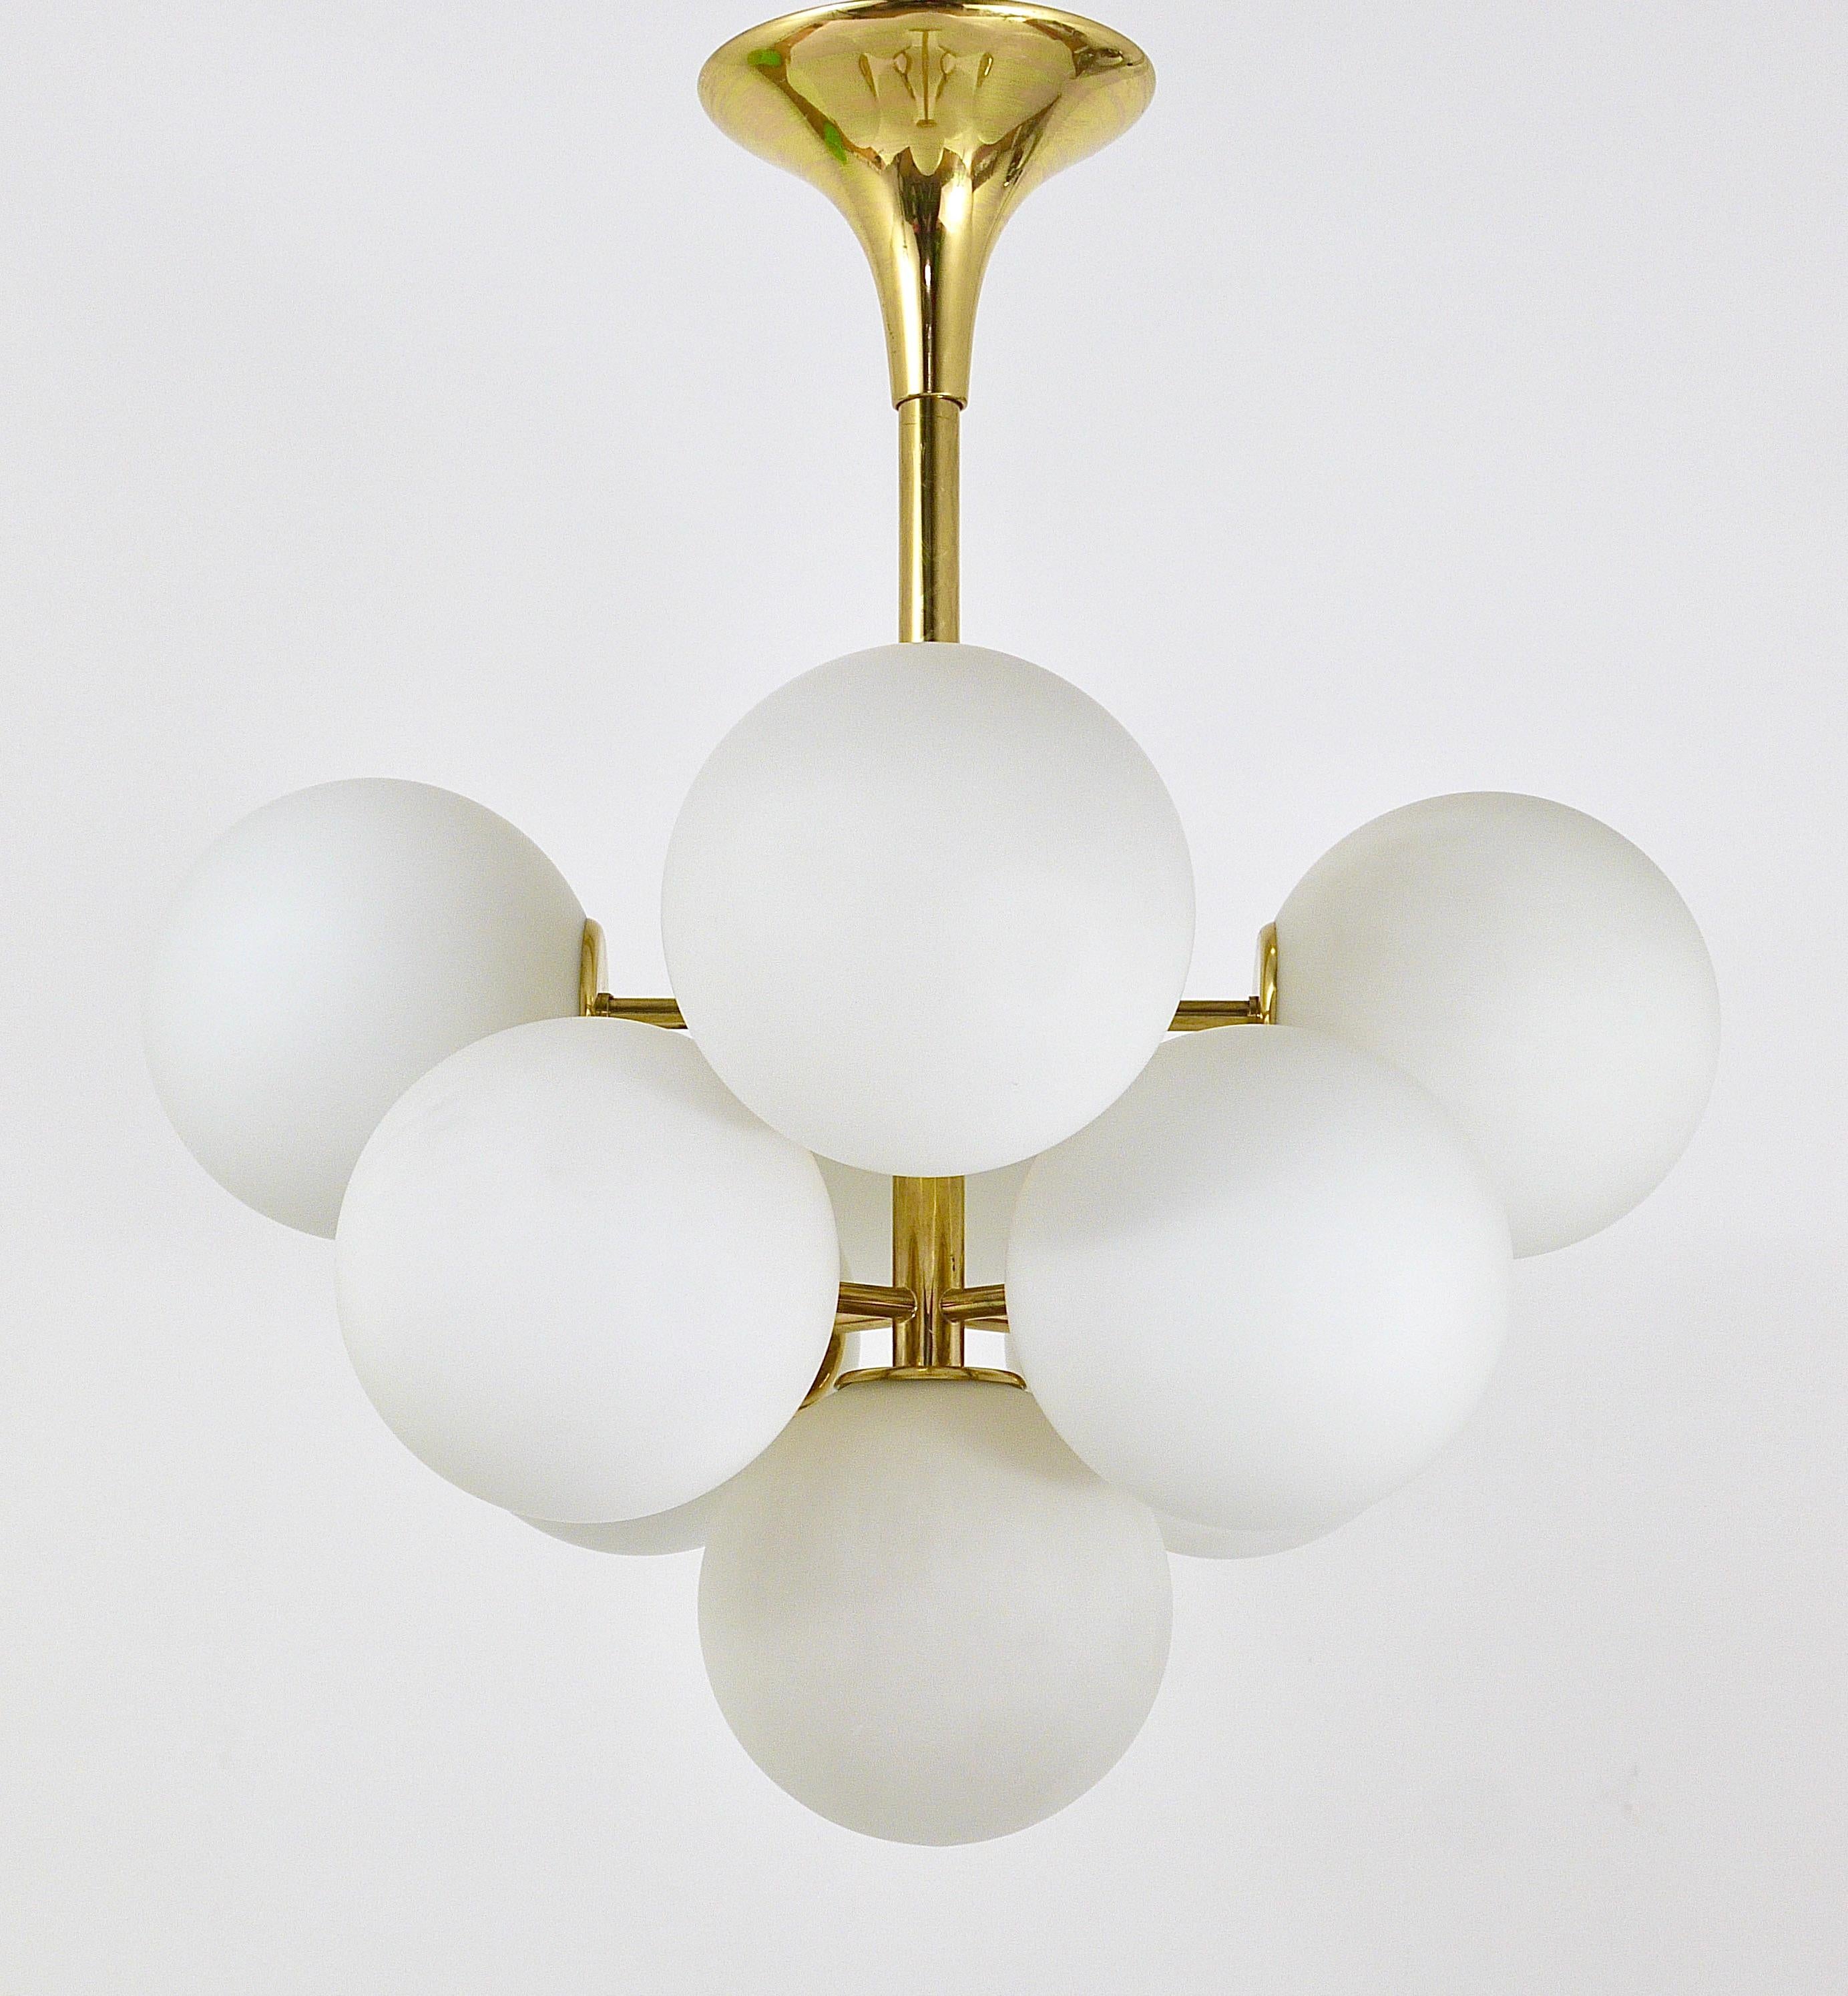 20th Century Atomic Brass Chandelier, White Glass Globes, in the style of E. R. Nele by Temde